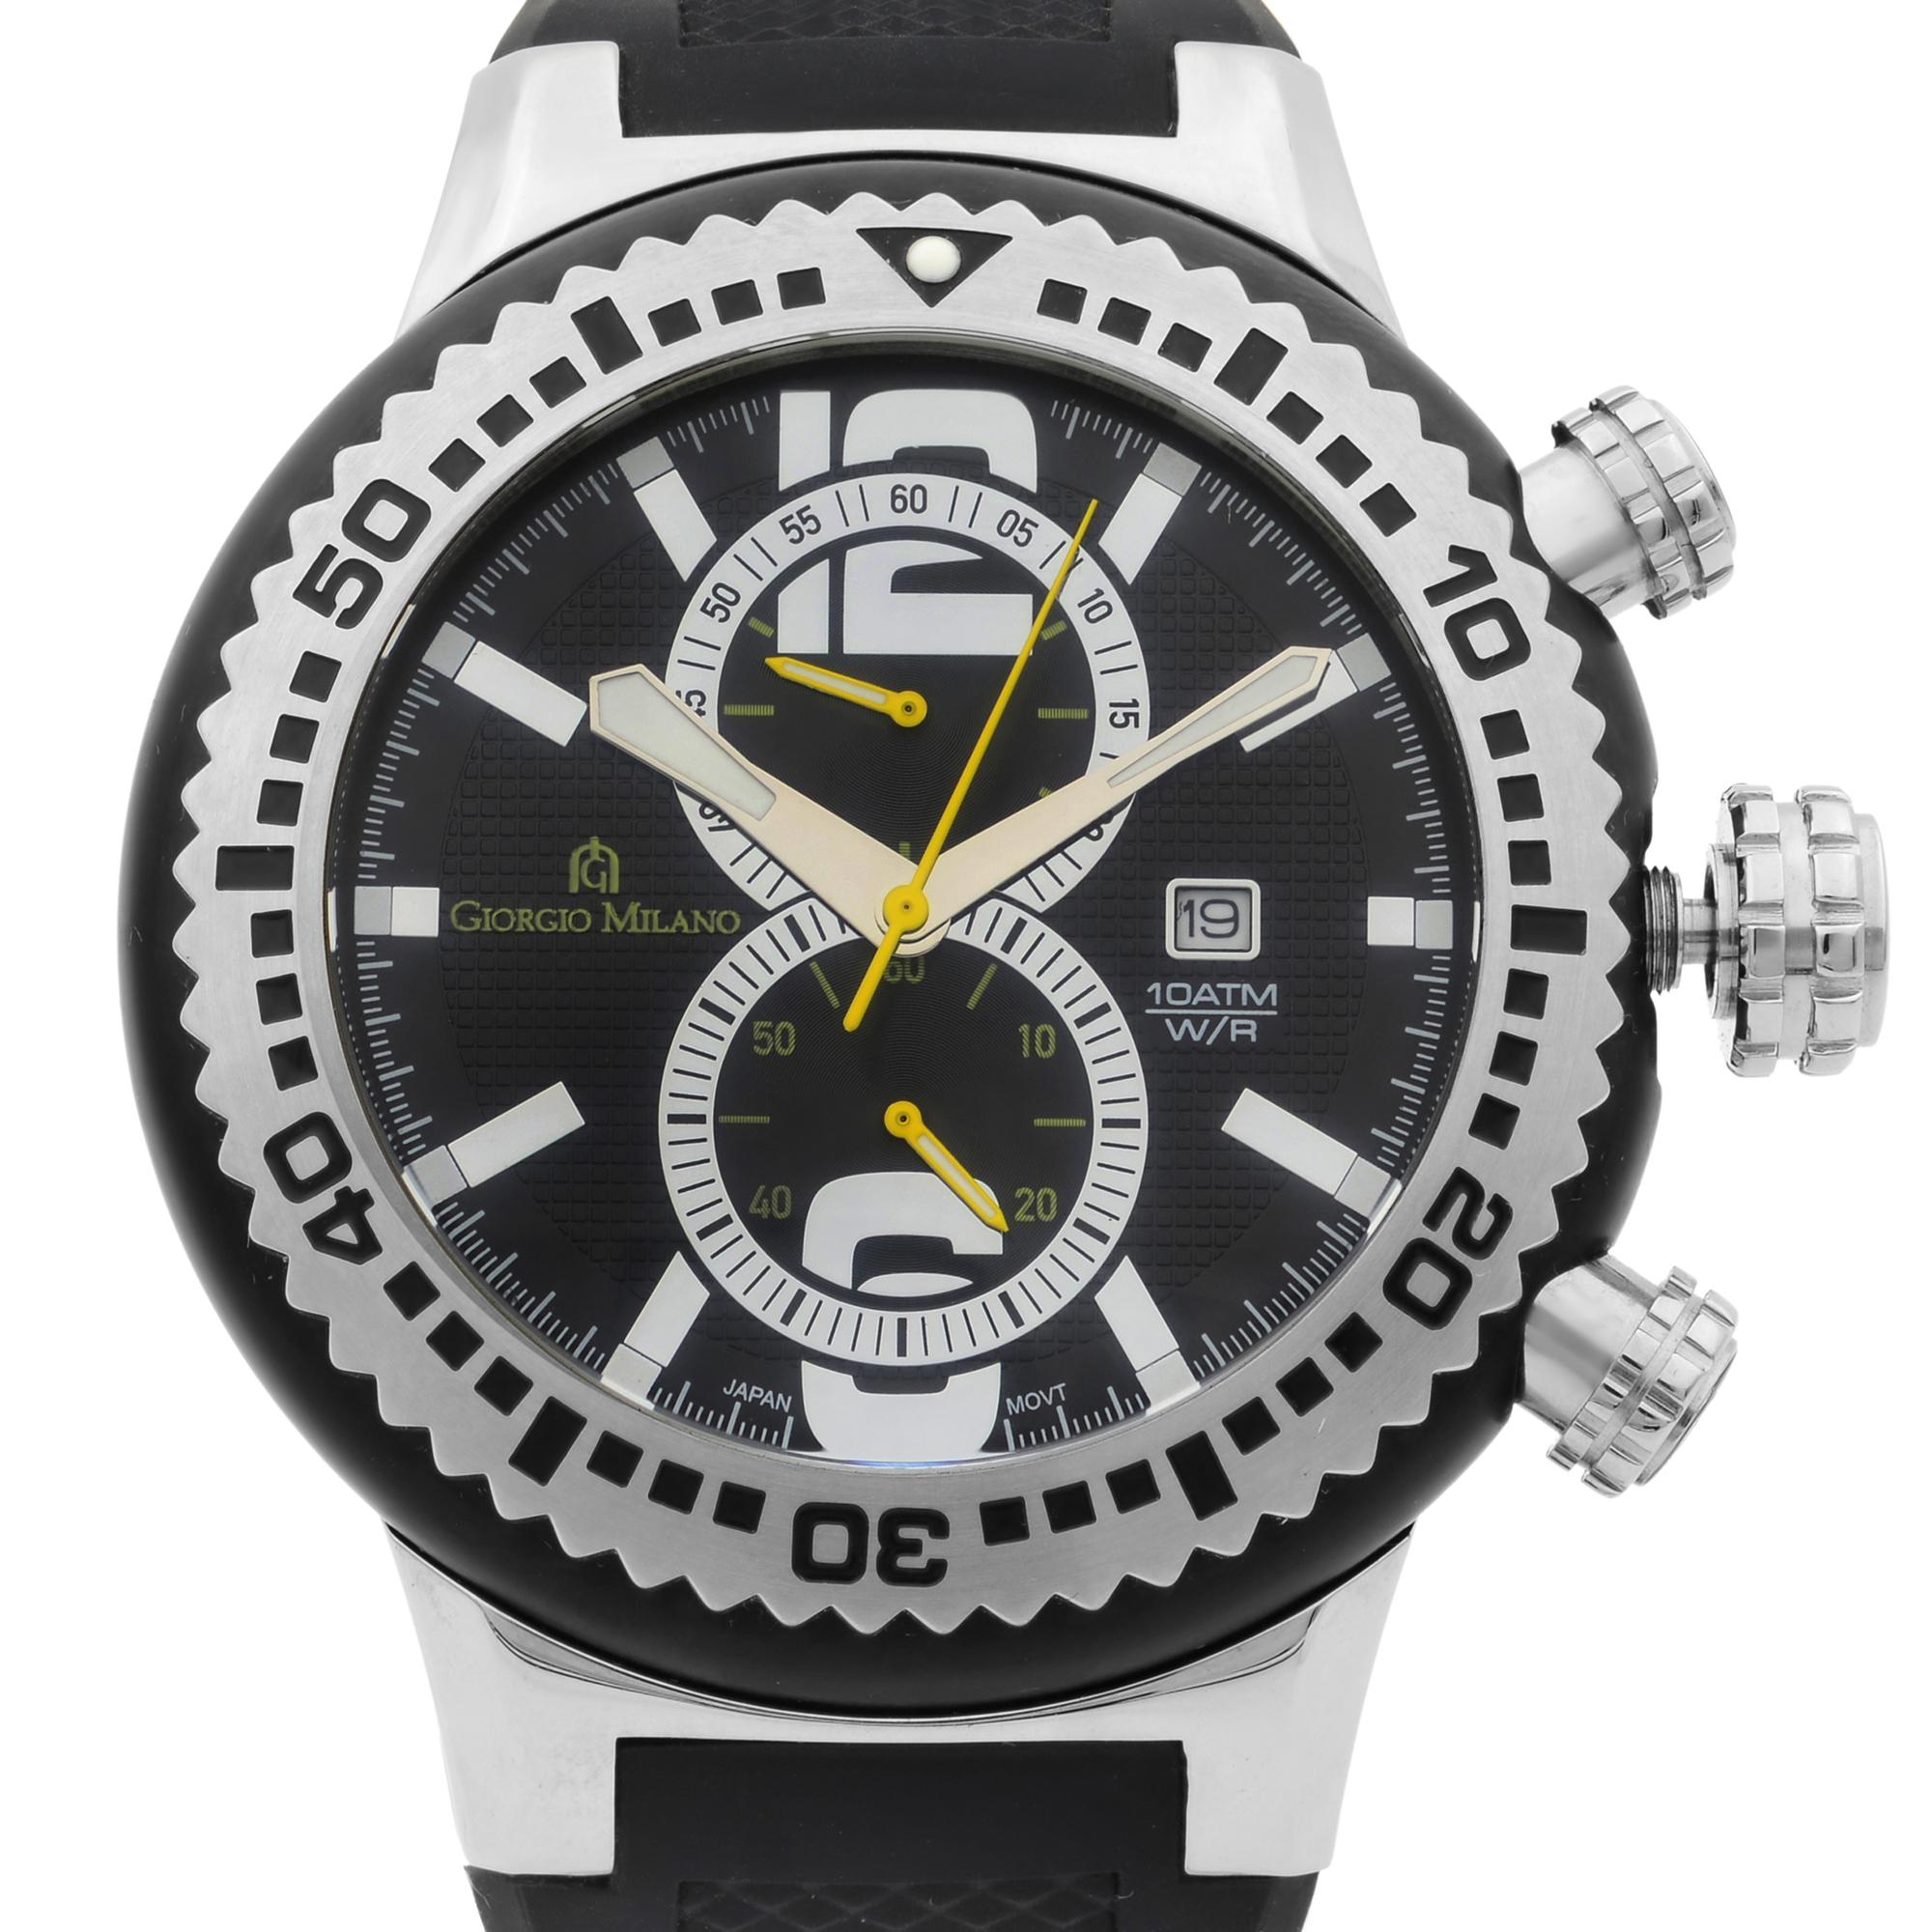 Giorgio Milano Stainless Steel Chronograph Quartz Mens Watch GM857SLBK.
The timepiece has hairline scratches on the case. Comes with original box and papers.
Movement	Quartz (Battery)
Gender	Men's
Case Material	Stainless Steel
Case